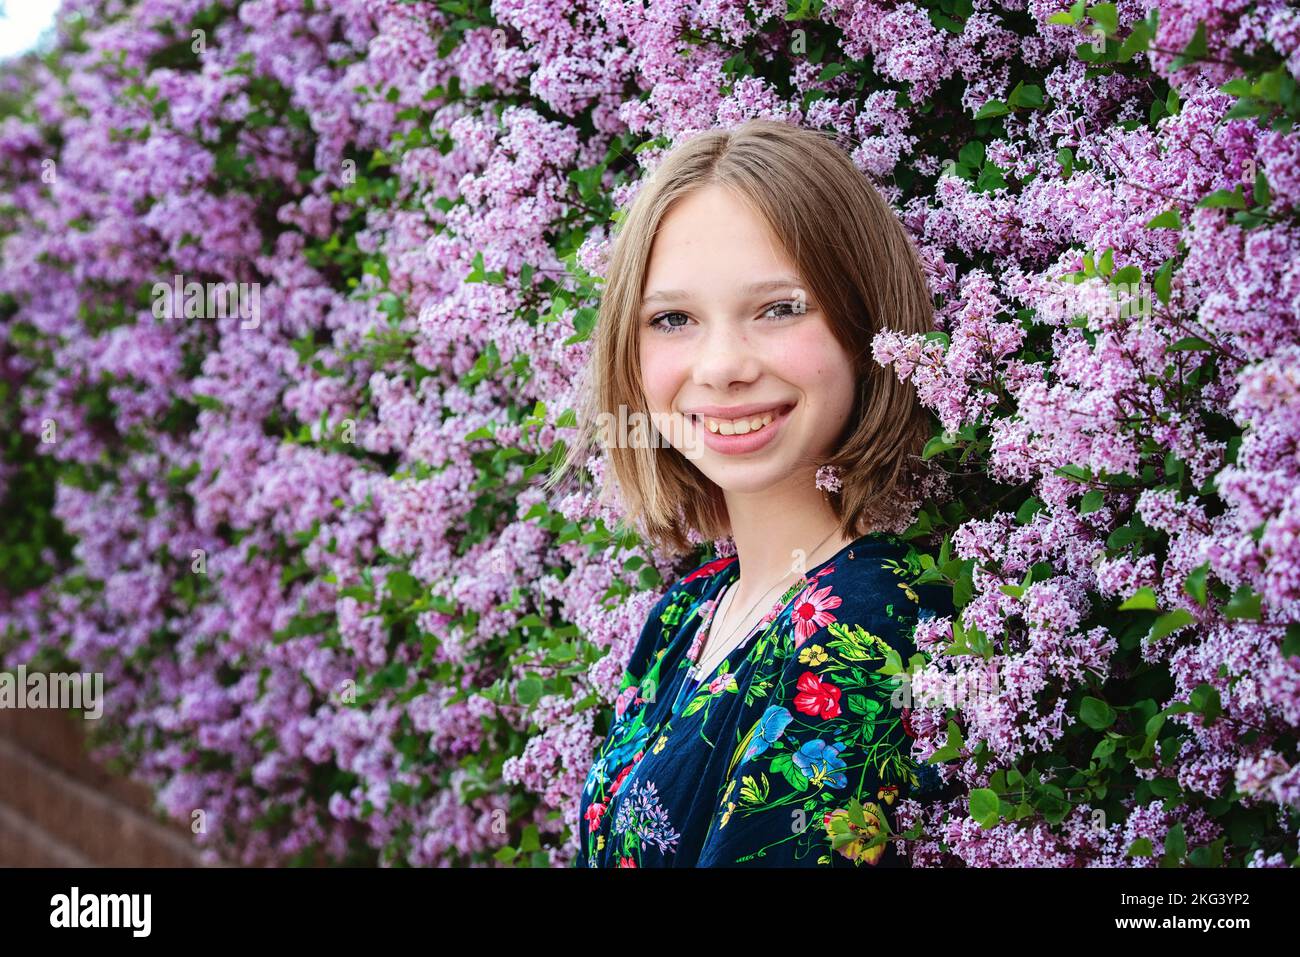 Pretty blond teen girl surrounded by lilac blooms. Stock Photo